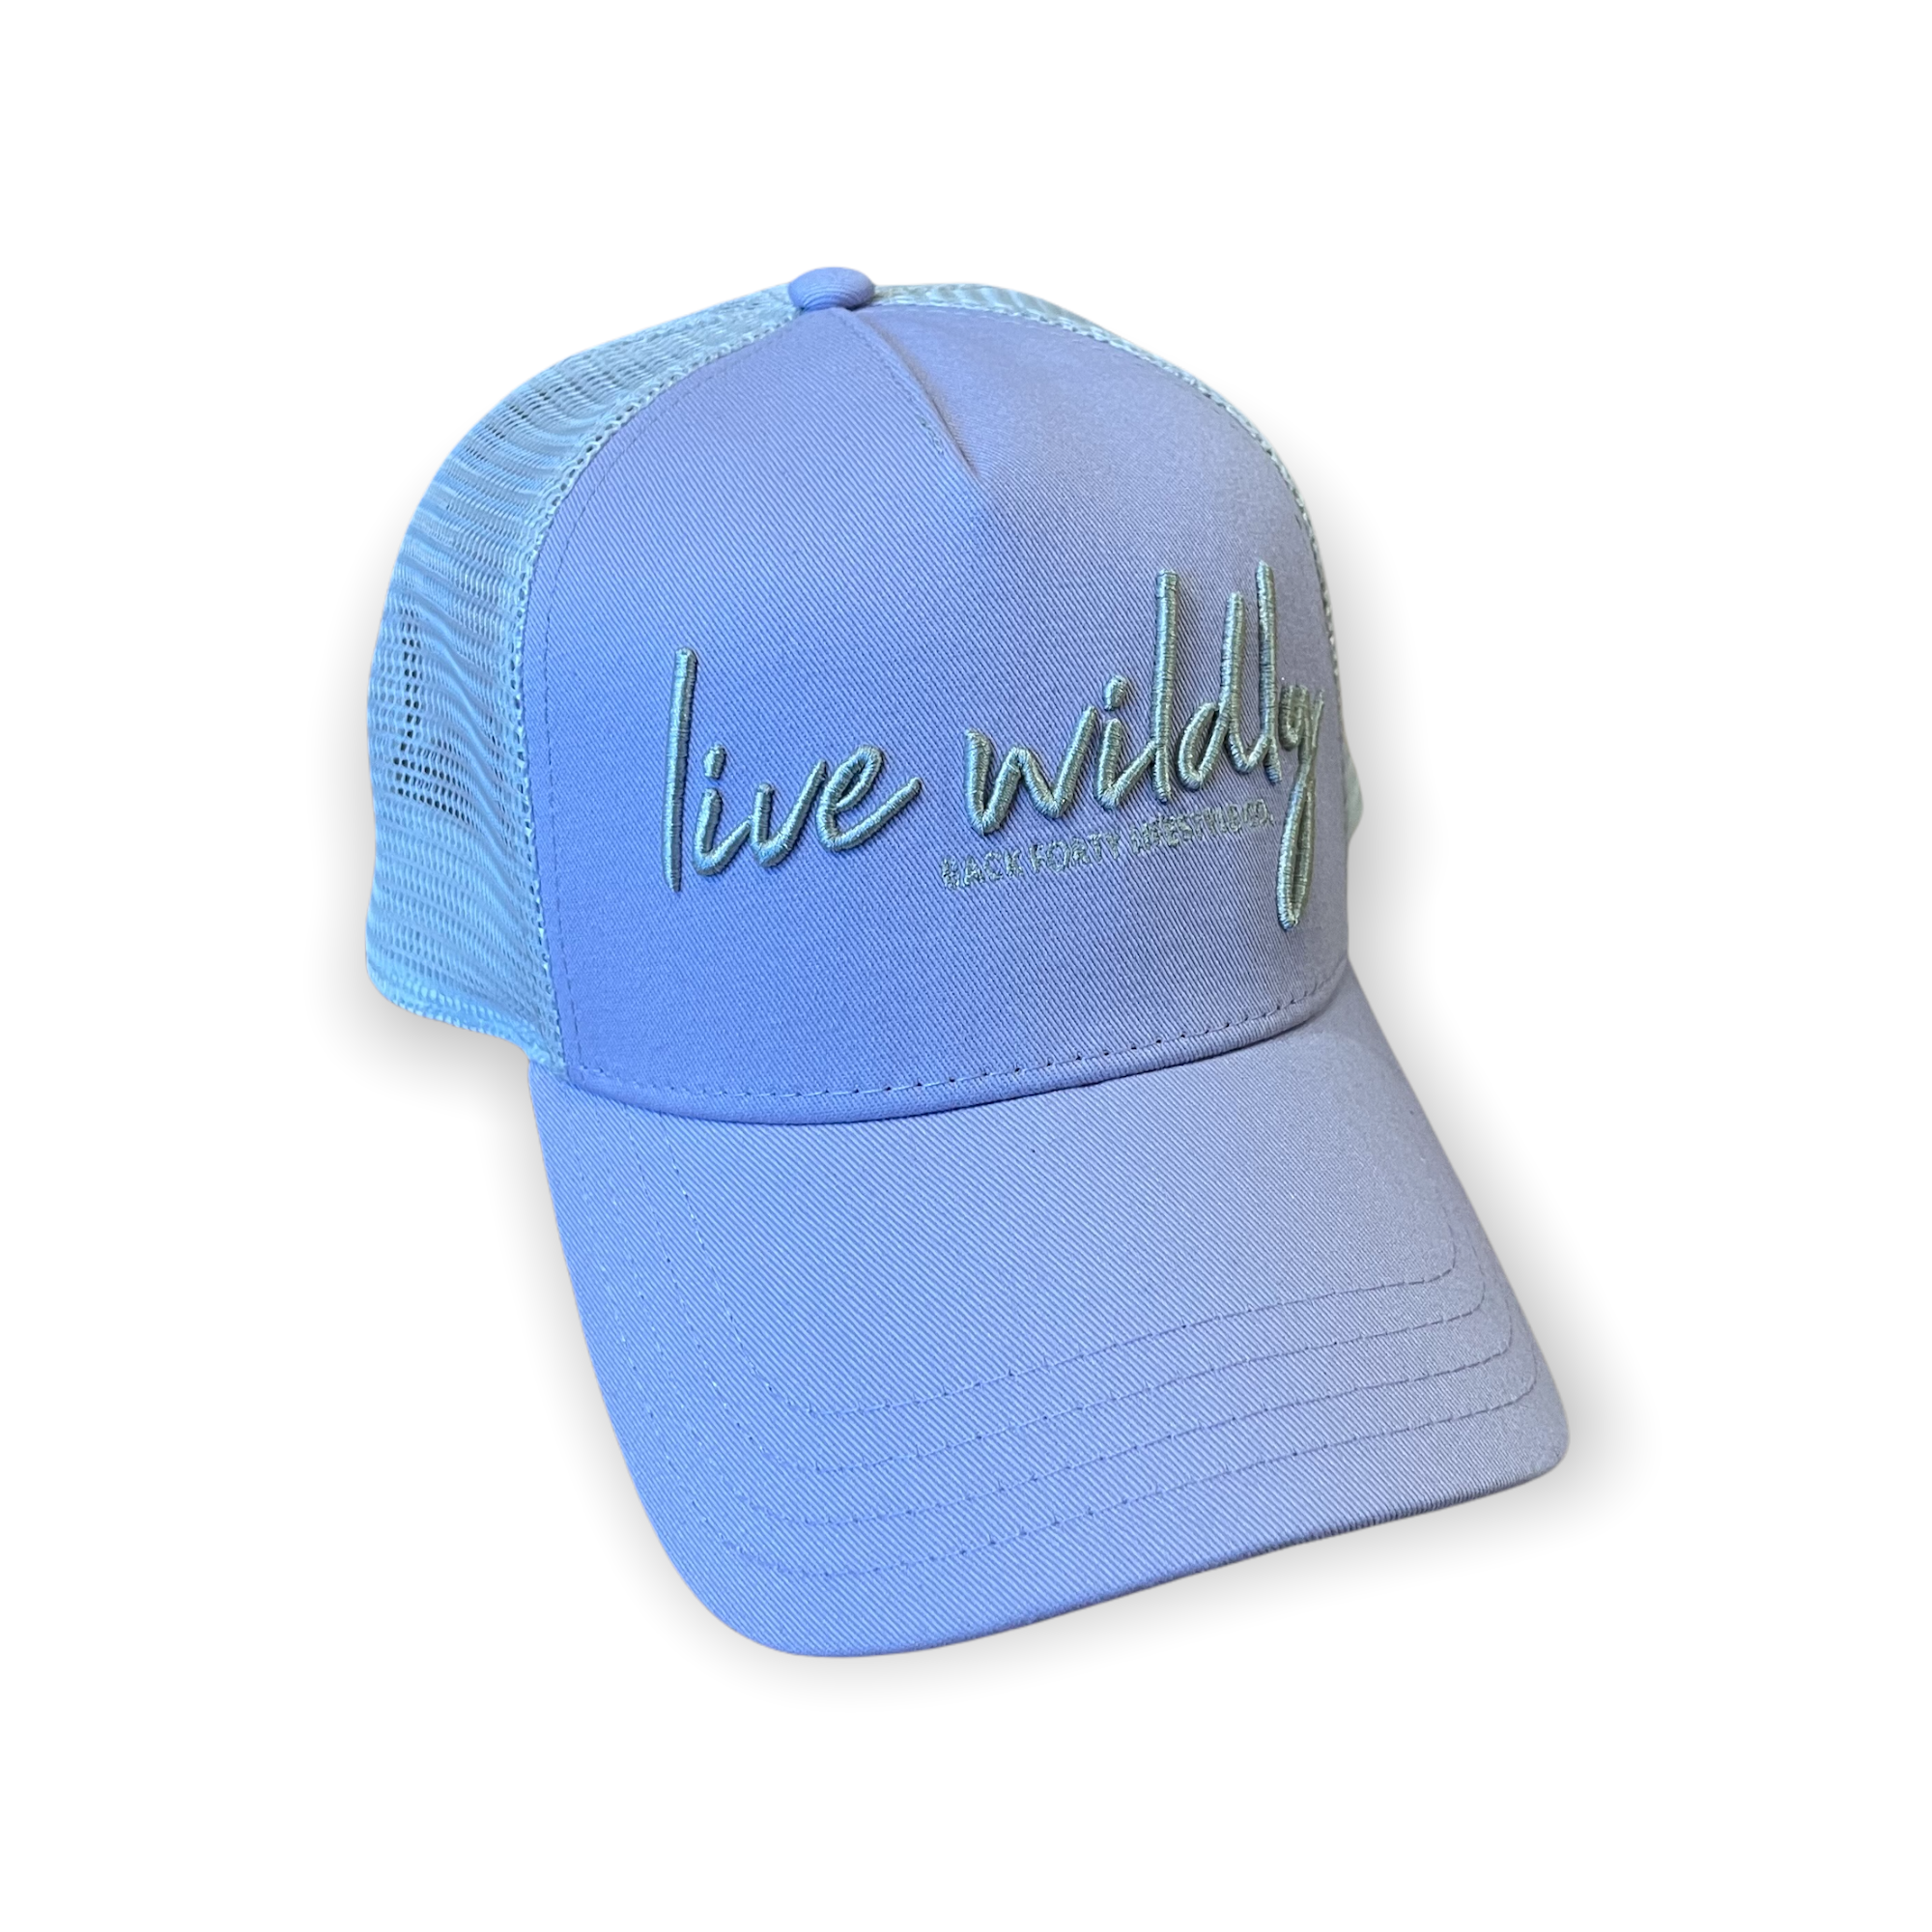 Live Wildly Embroidered Hat